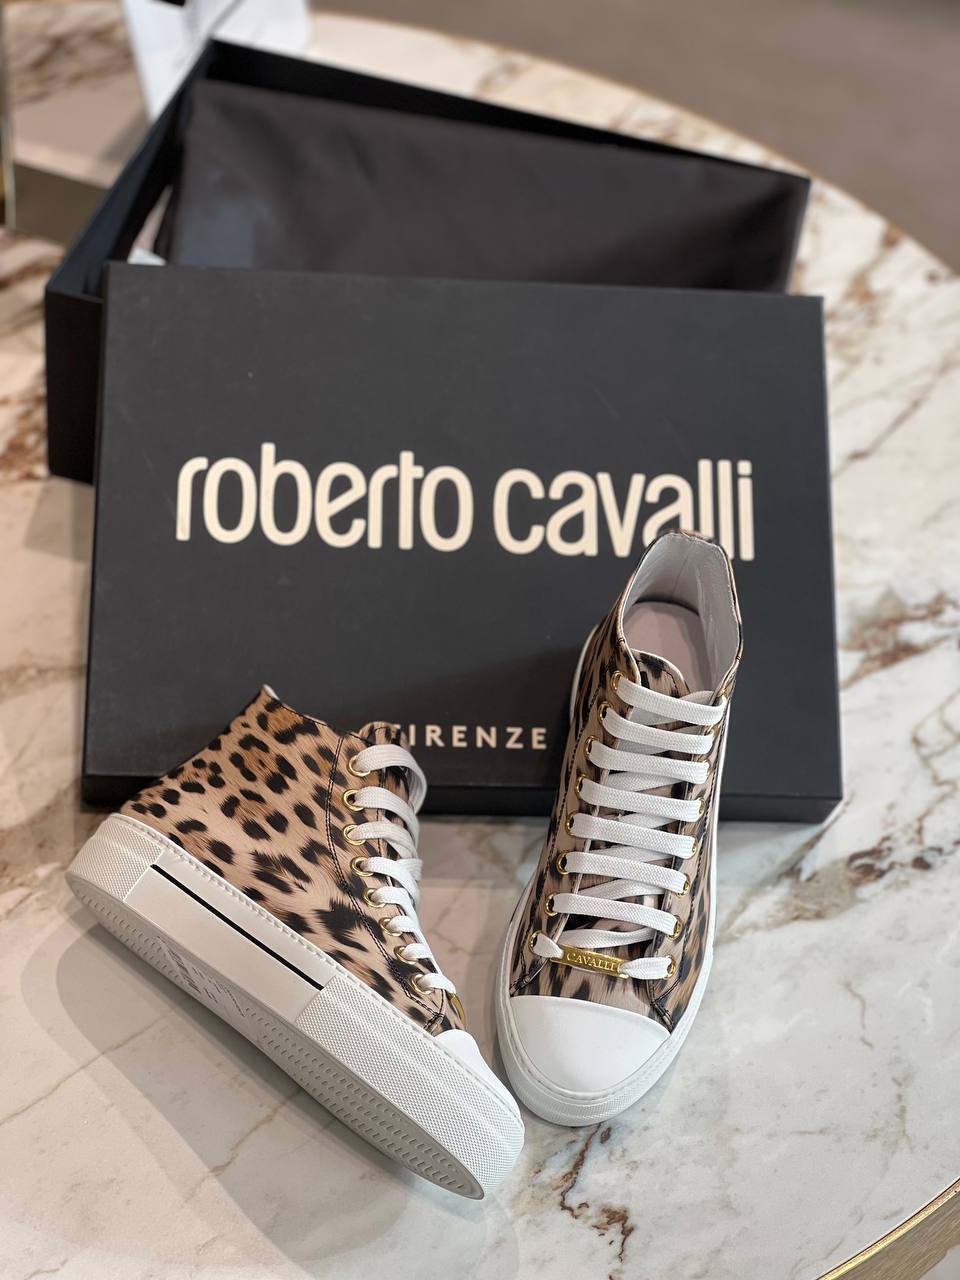 Roberto Cavalli Outlets 5101